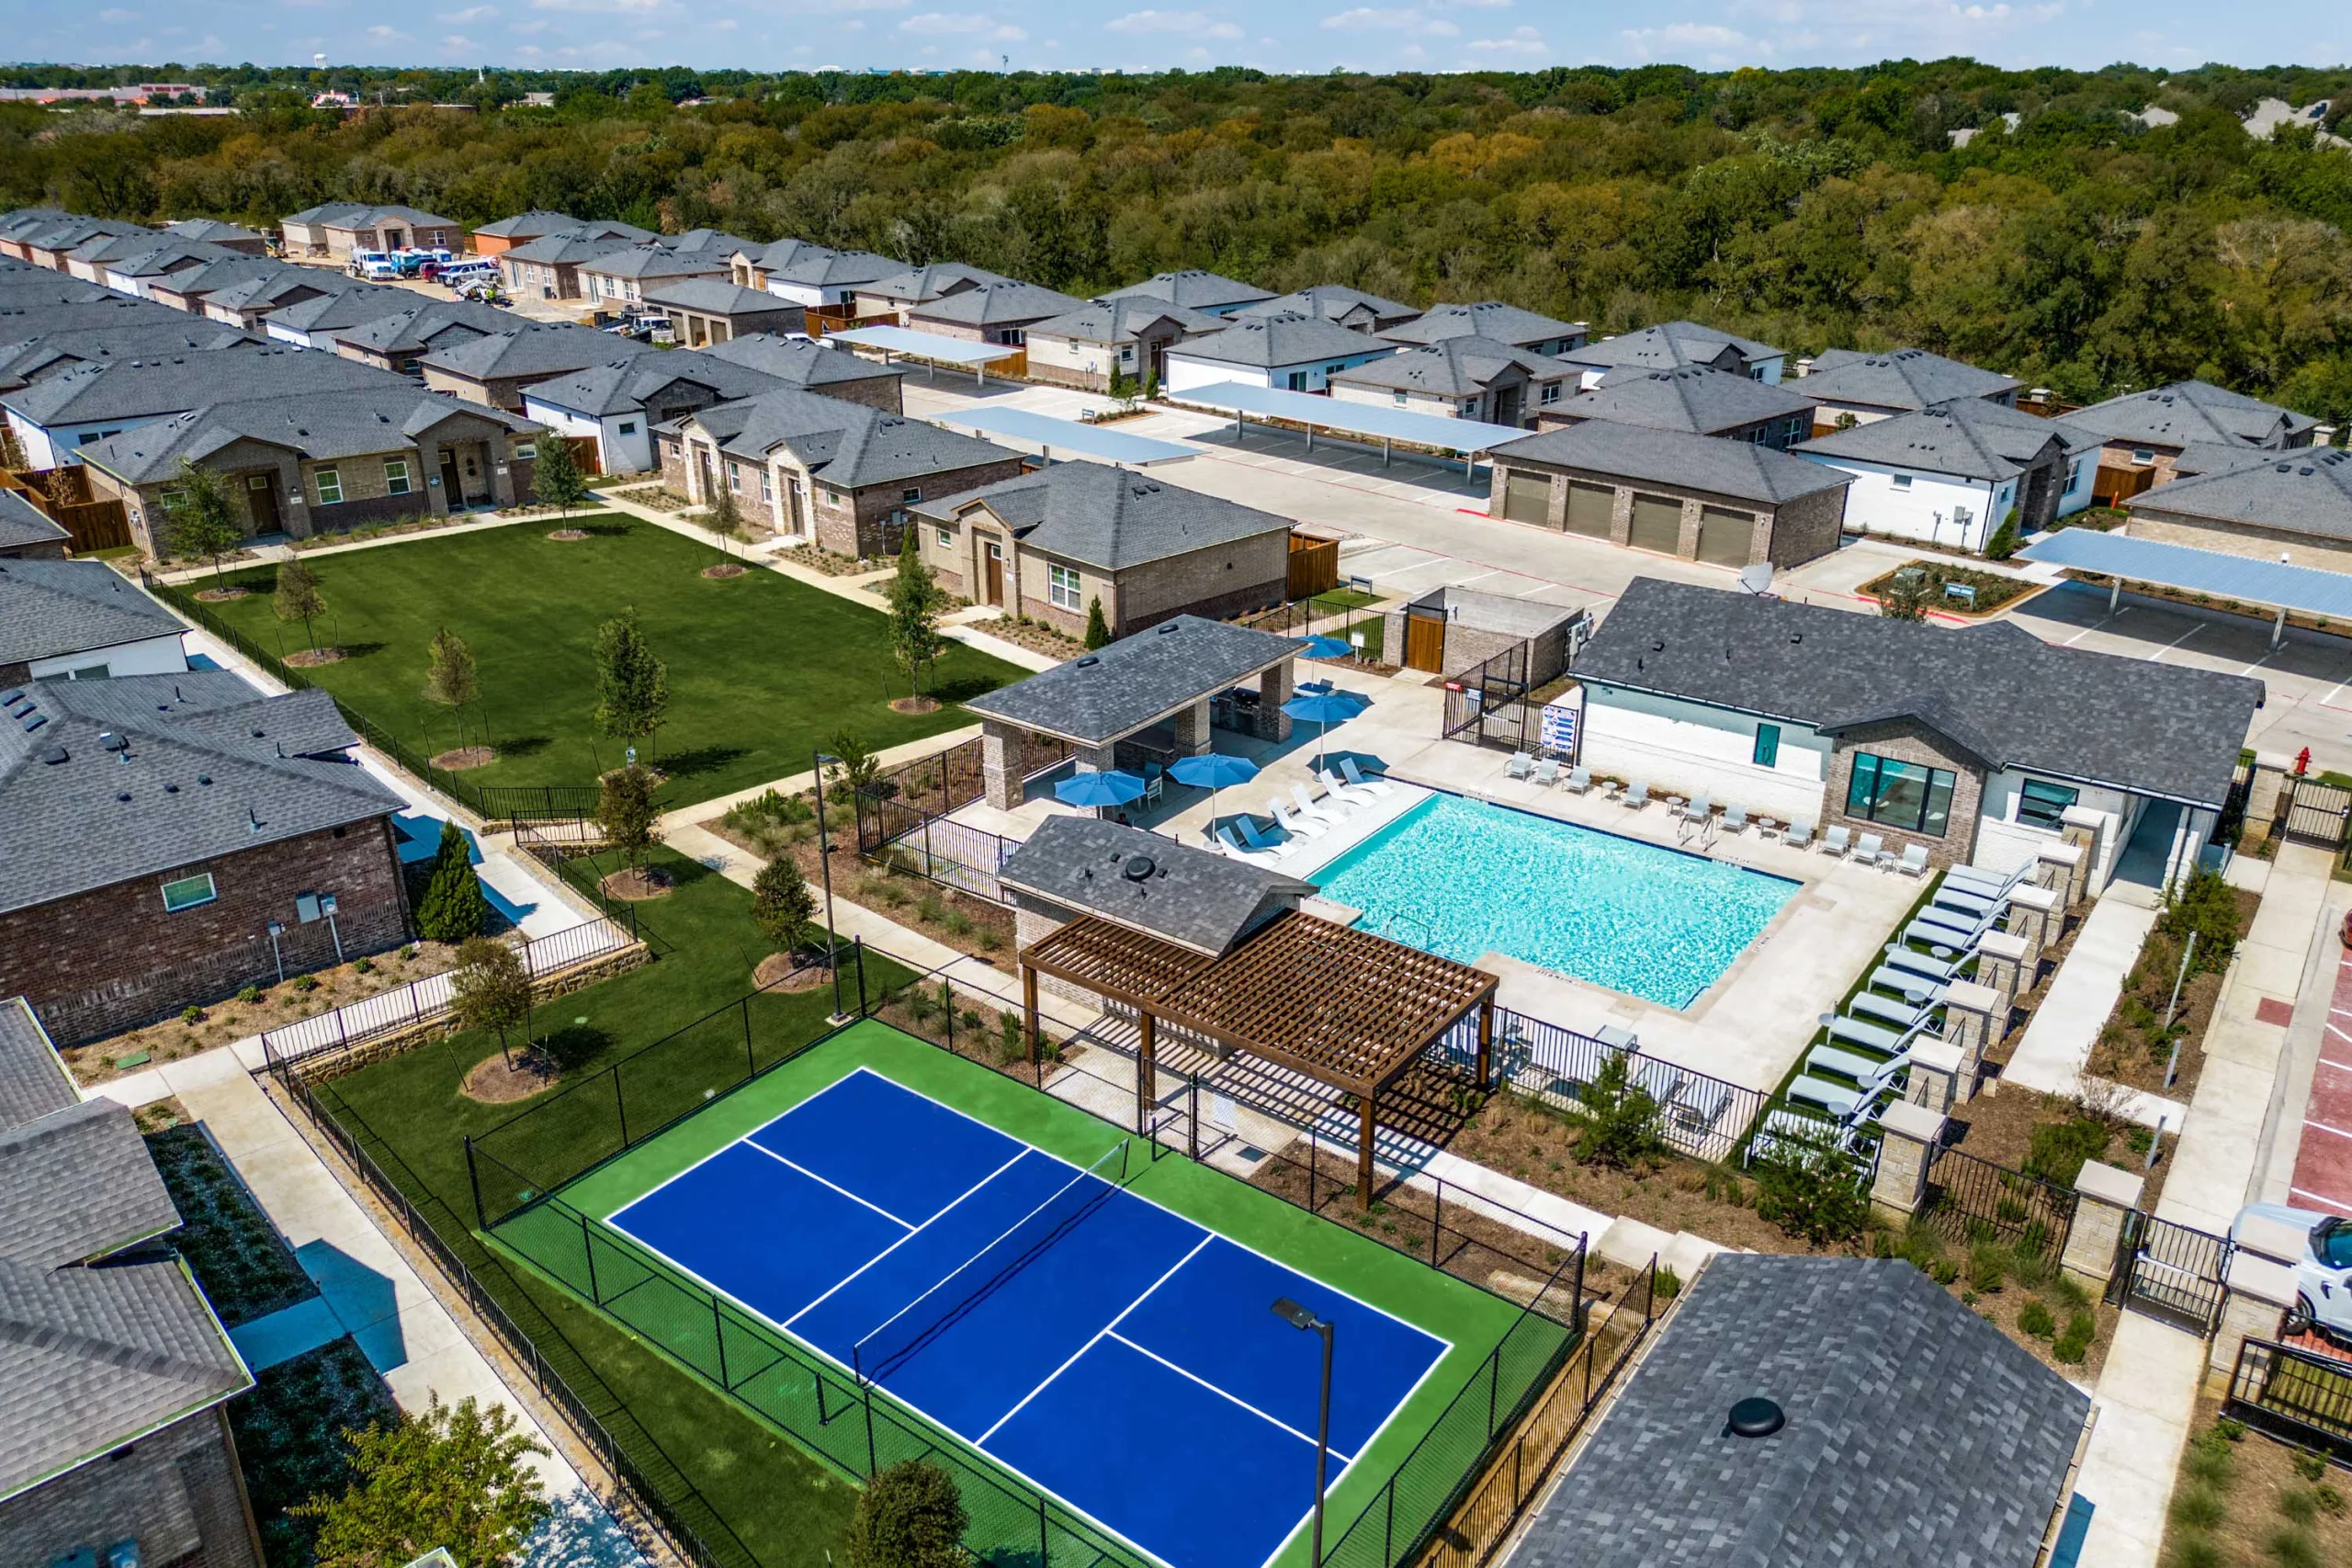 Aerial view of pickleball court, pool, grass area, and welcome center